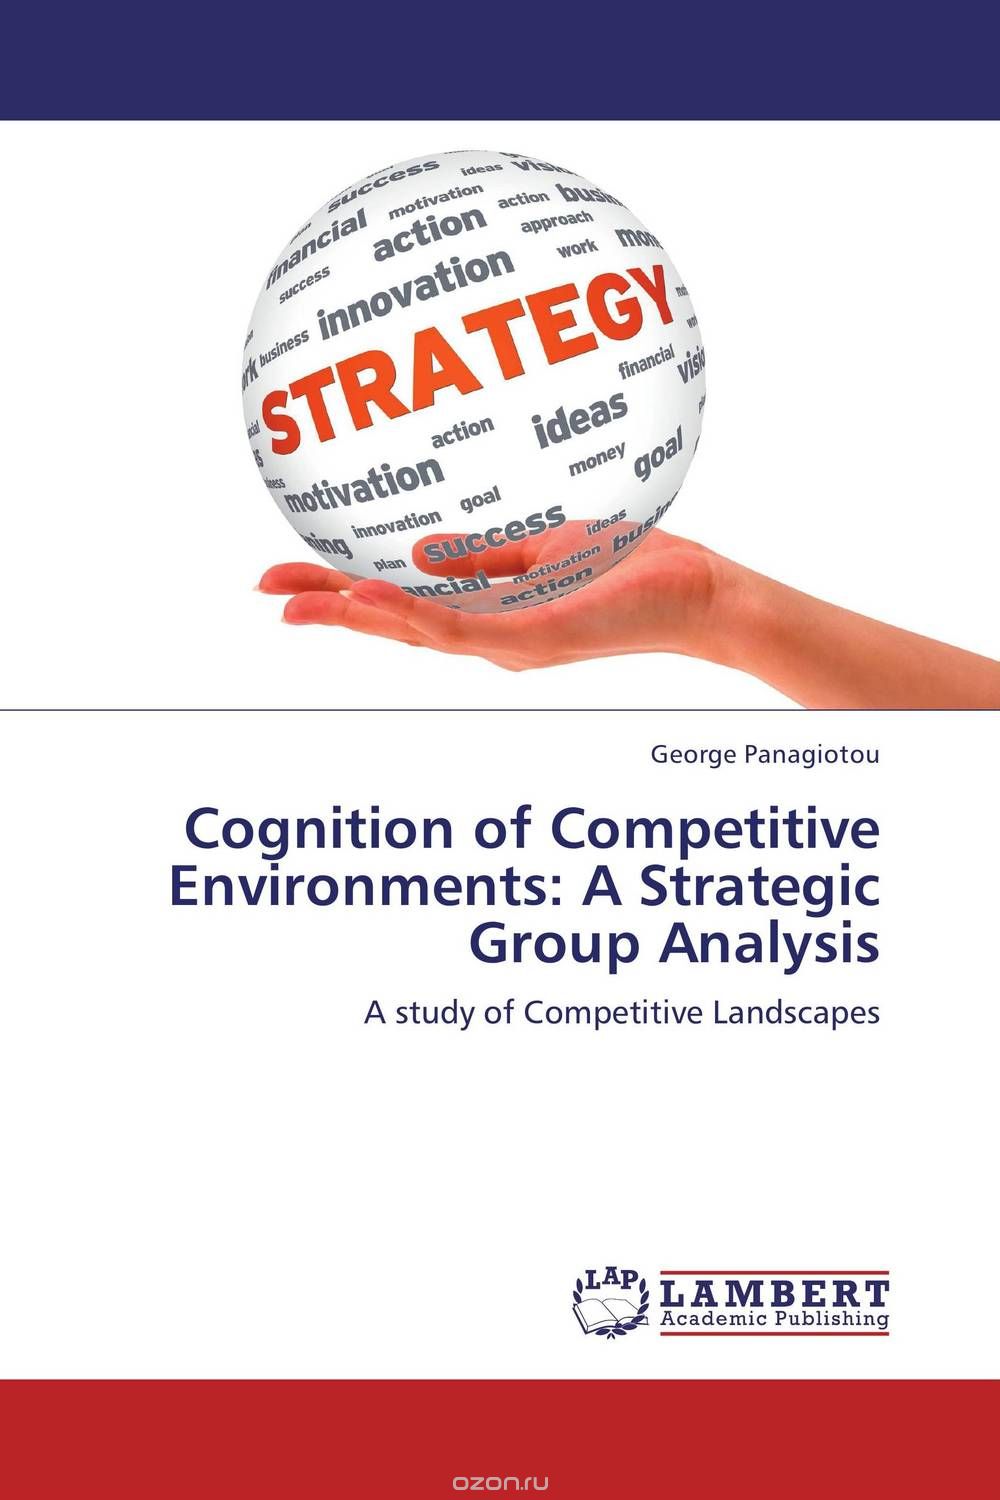 Скачать книгу "Cognition of Competitive Environments: A Strategic Group Analysis"